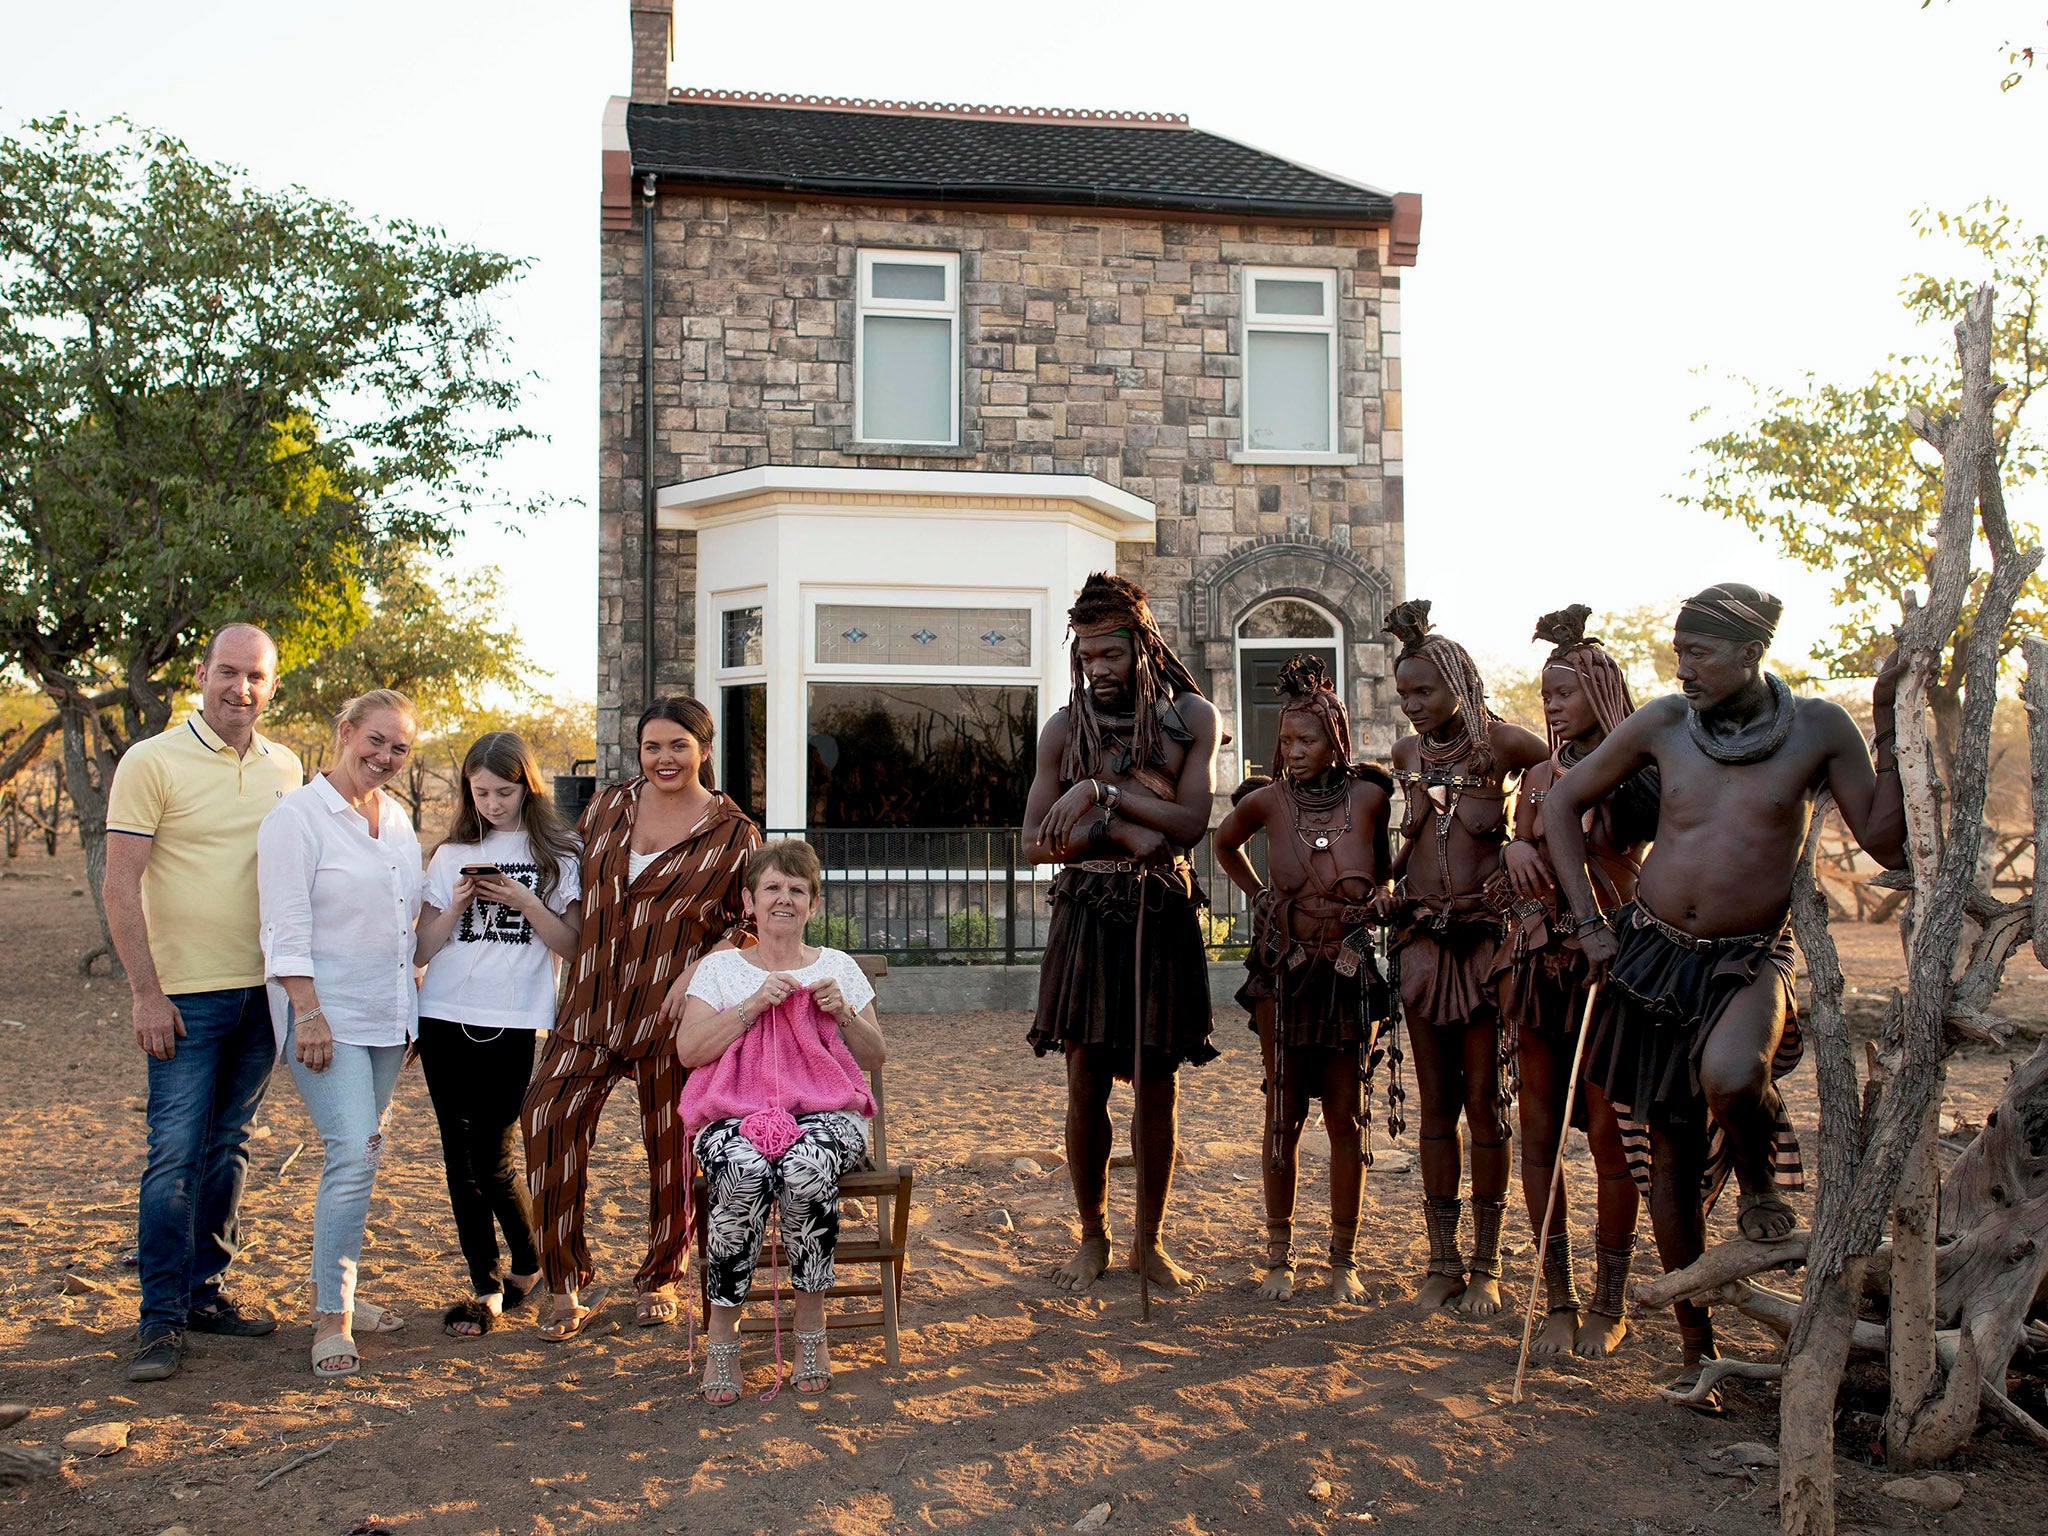 ‘The Tribe Next Door’, one of Channel 4’s new offerings